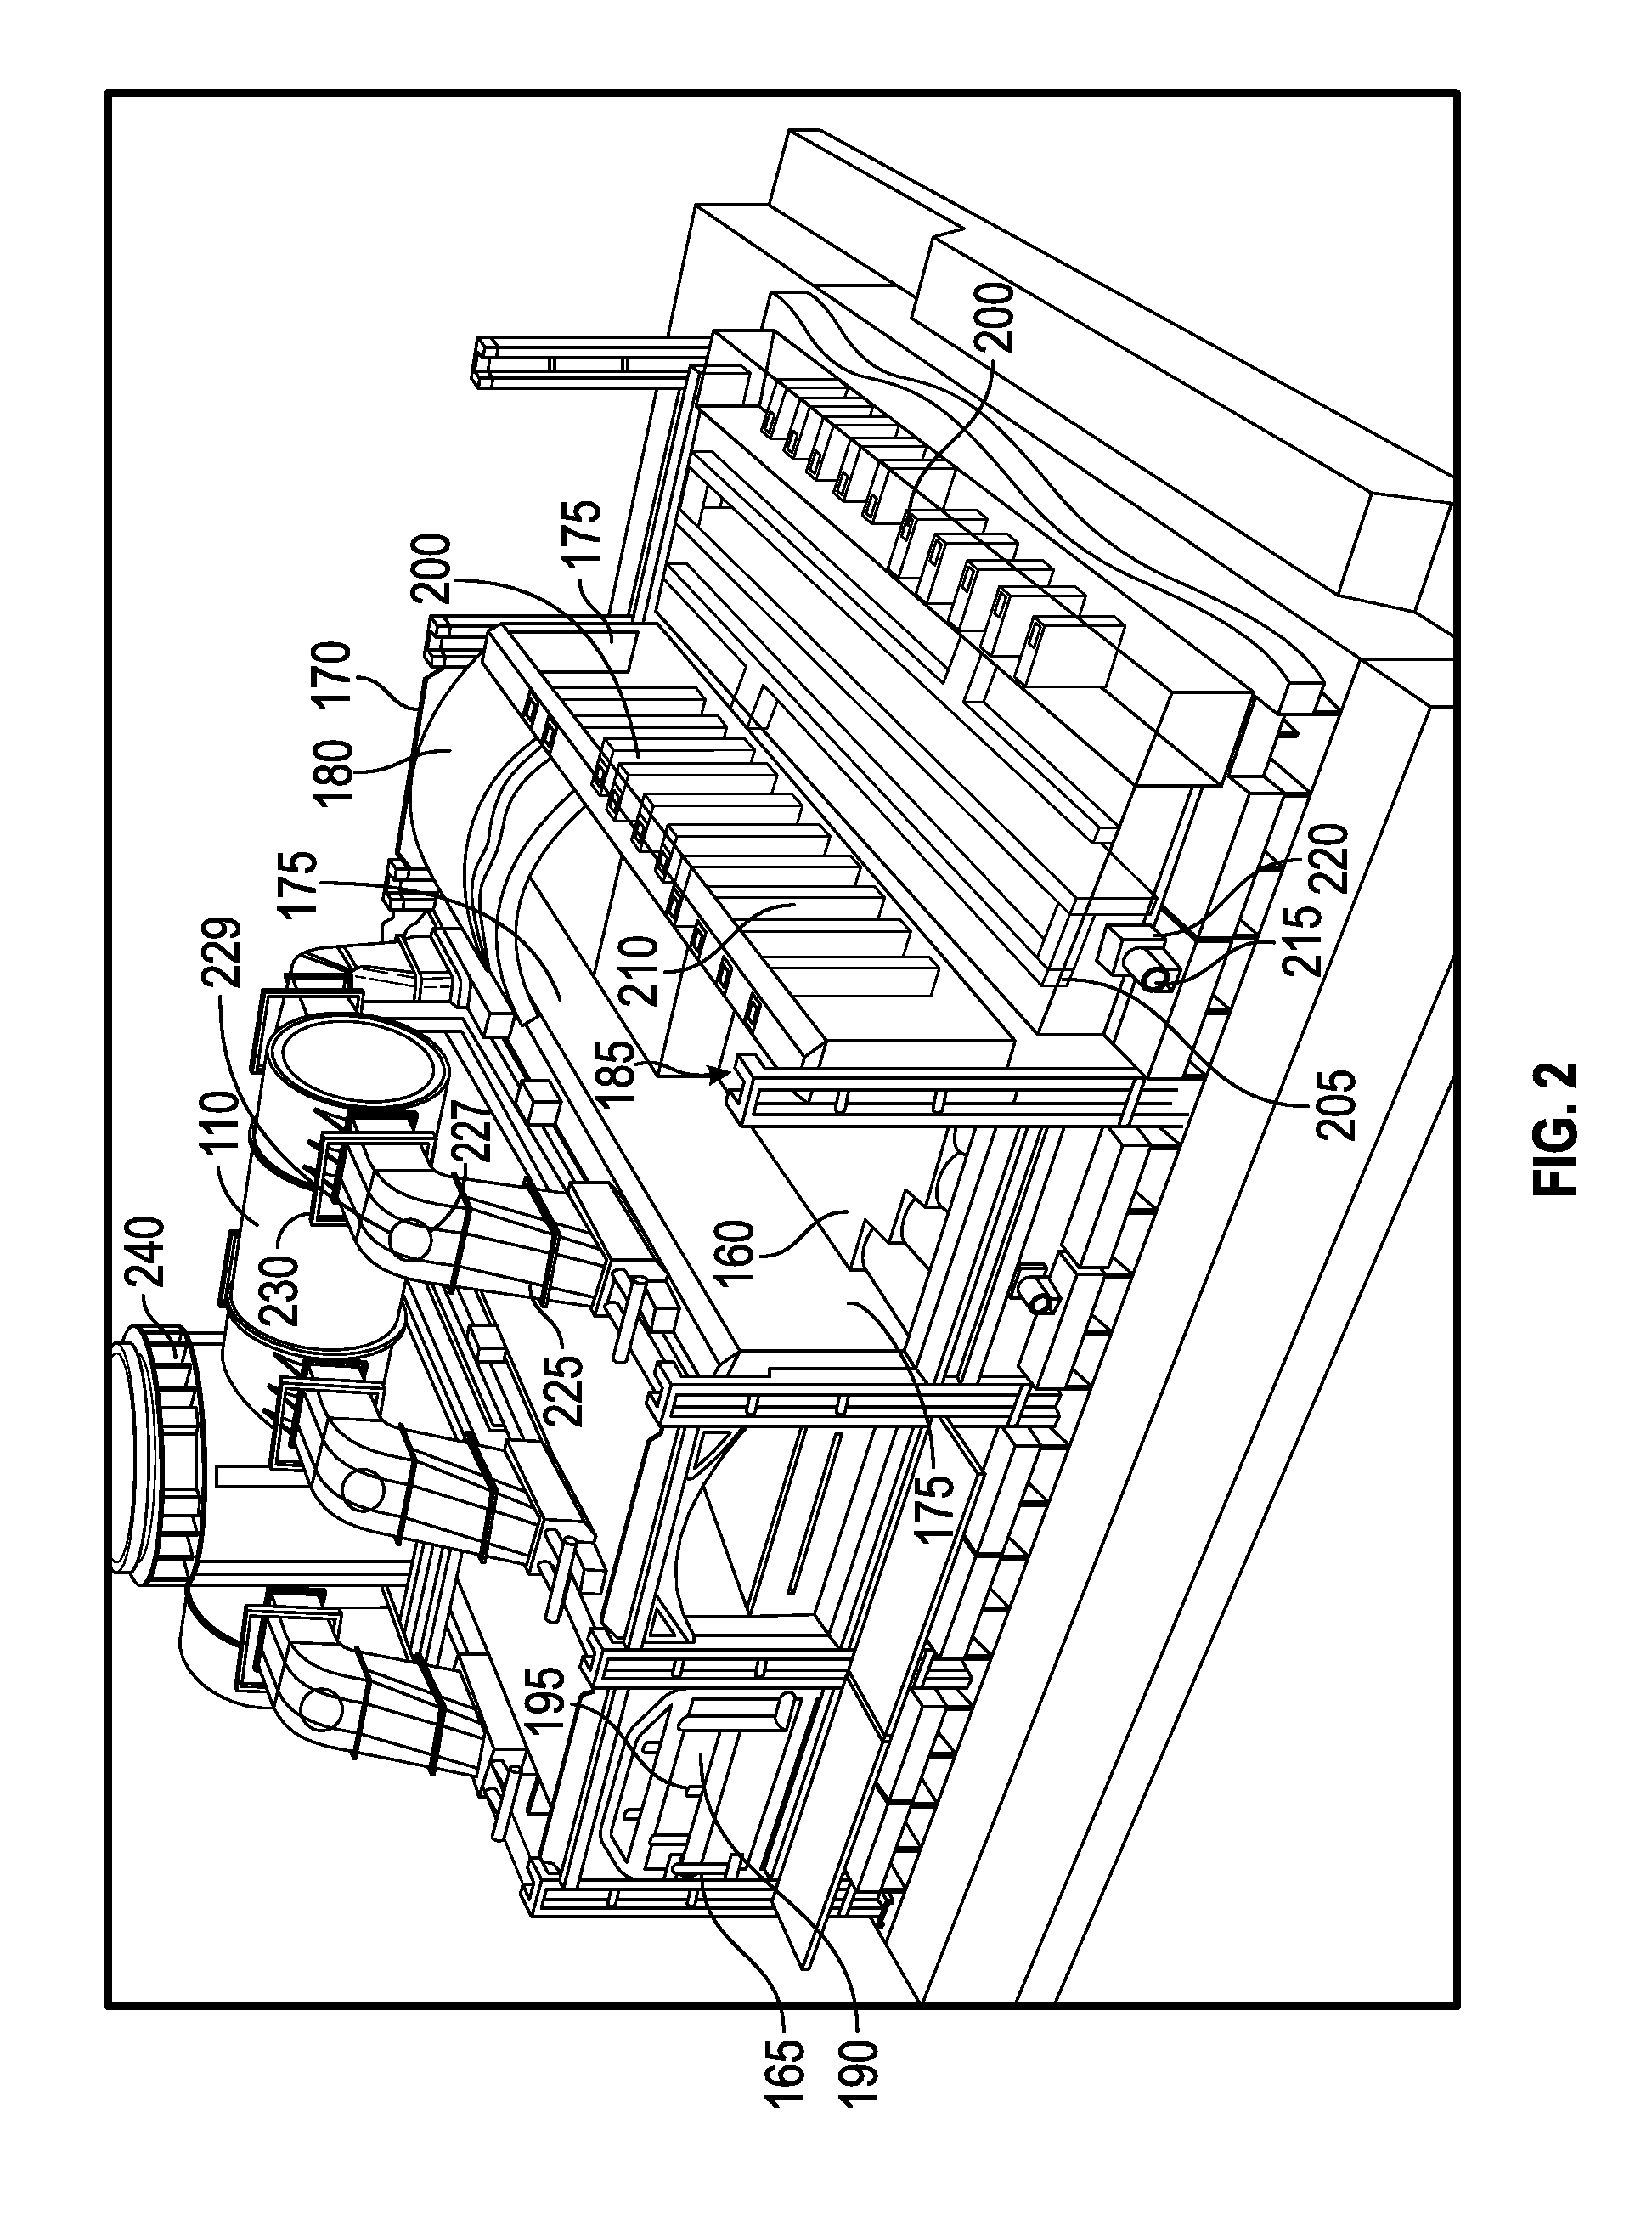 Method and apparatus for volatile matter sharing in stamp-charged coke ovens